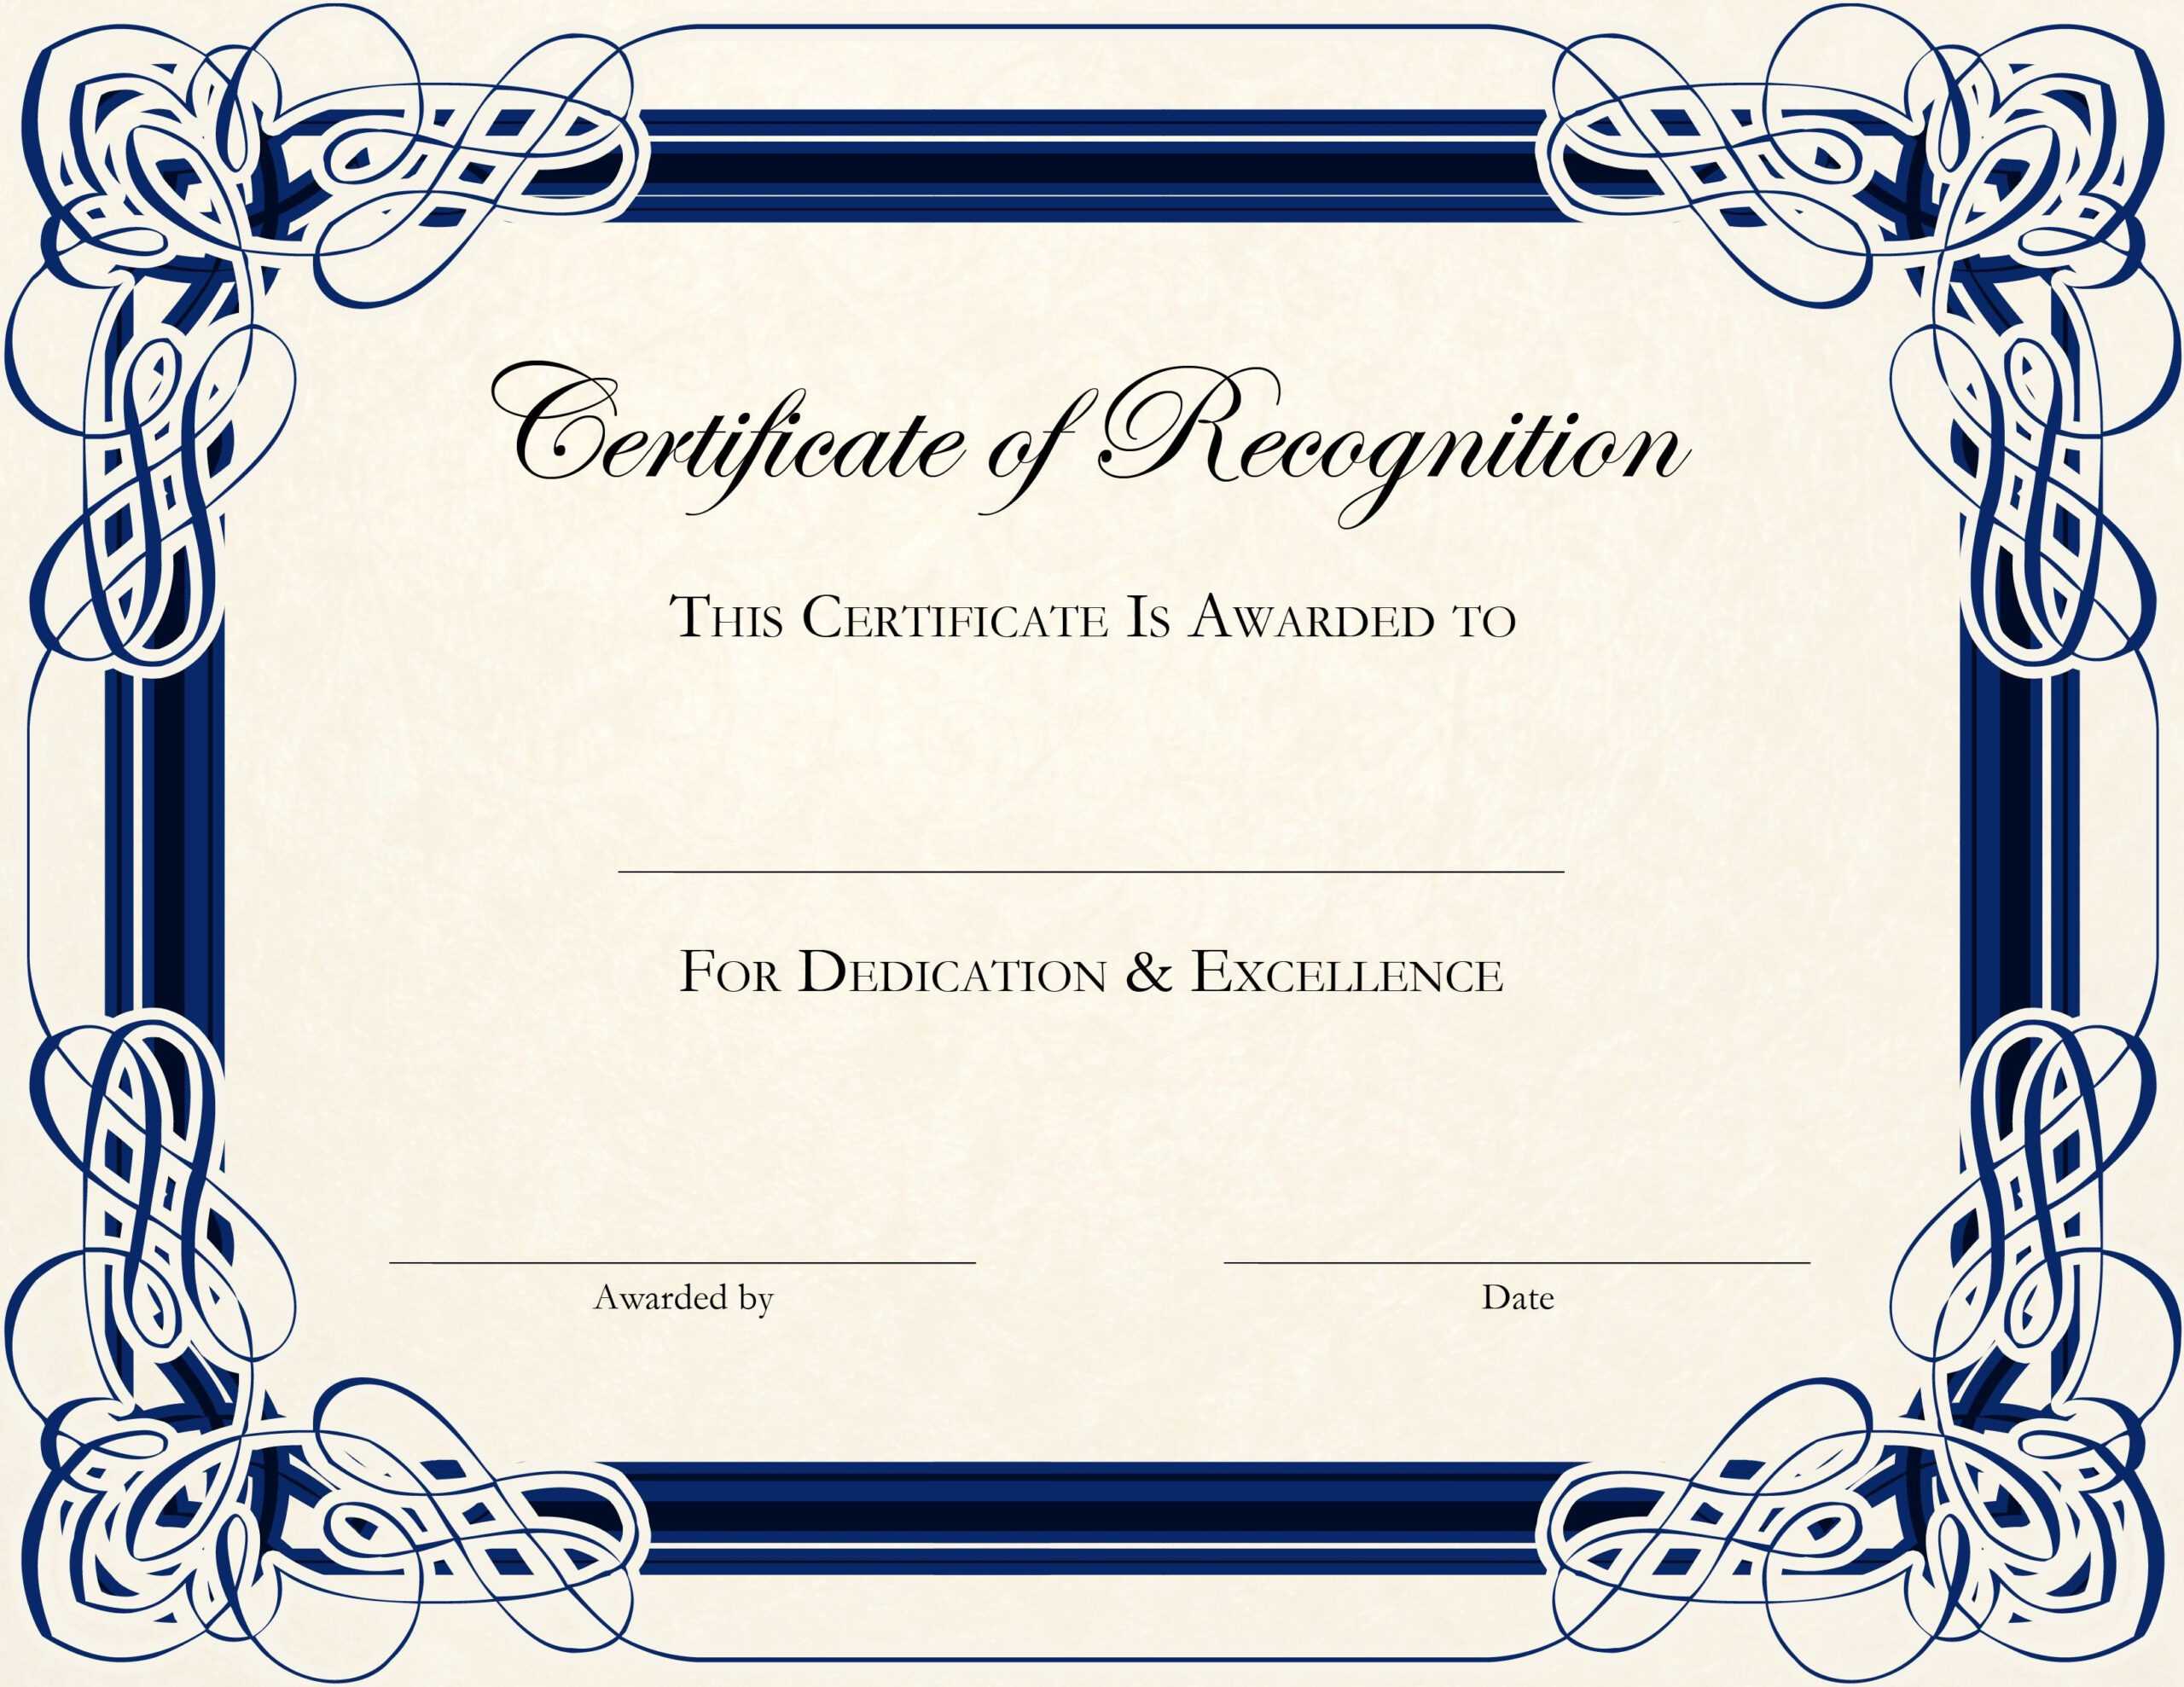 Printable Certificate Template | Room Surf Intended For Generic Certificate Template